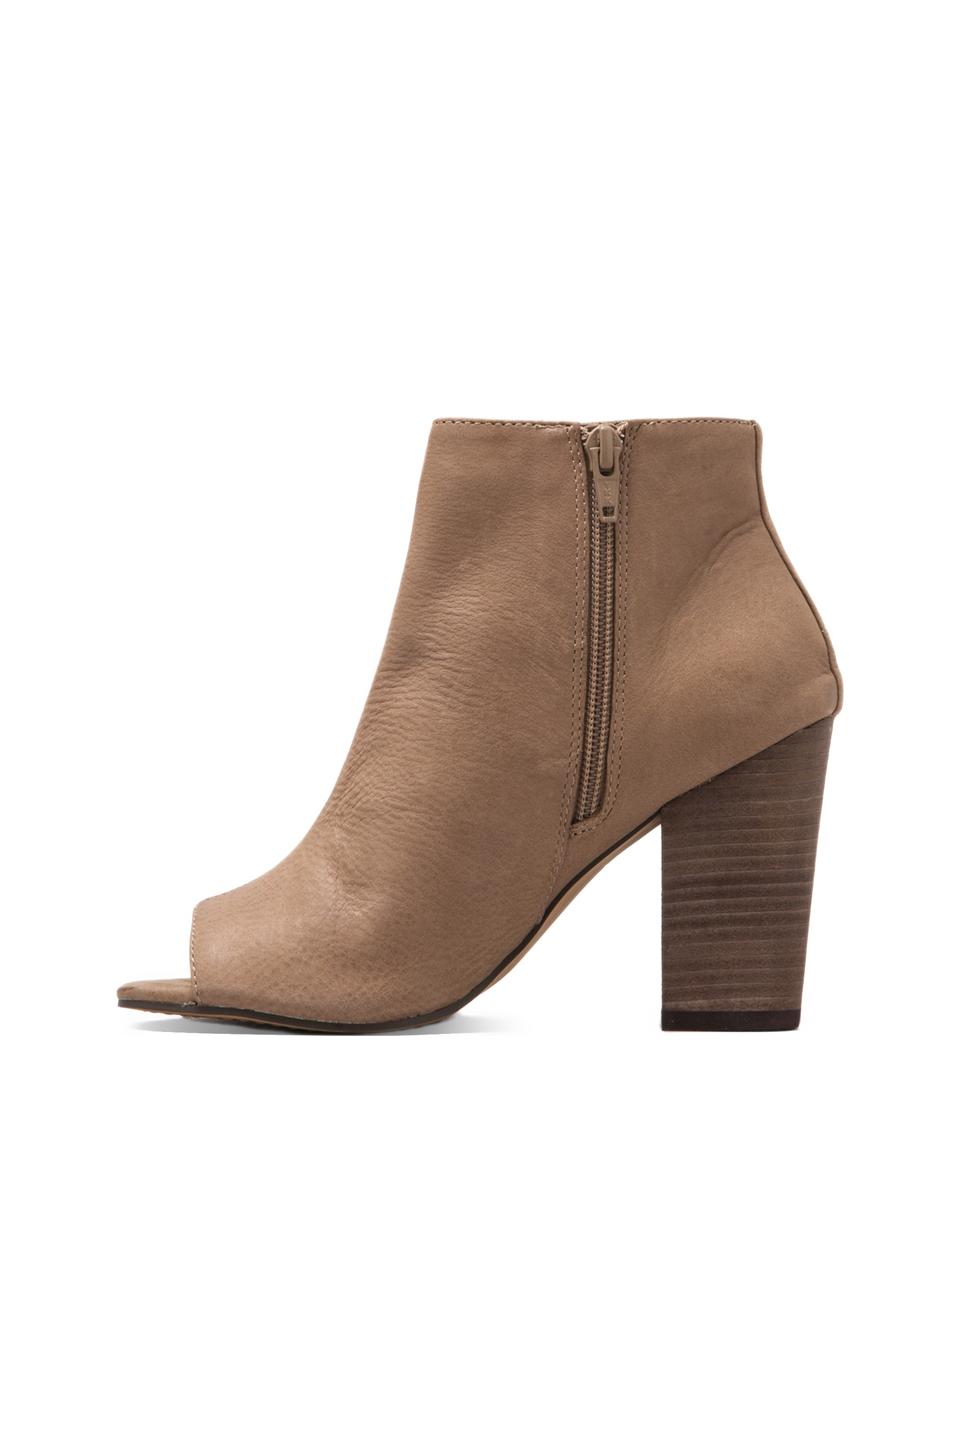 Steven Clara Bootie in Taupe Leather | REVOLVE